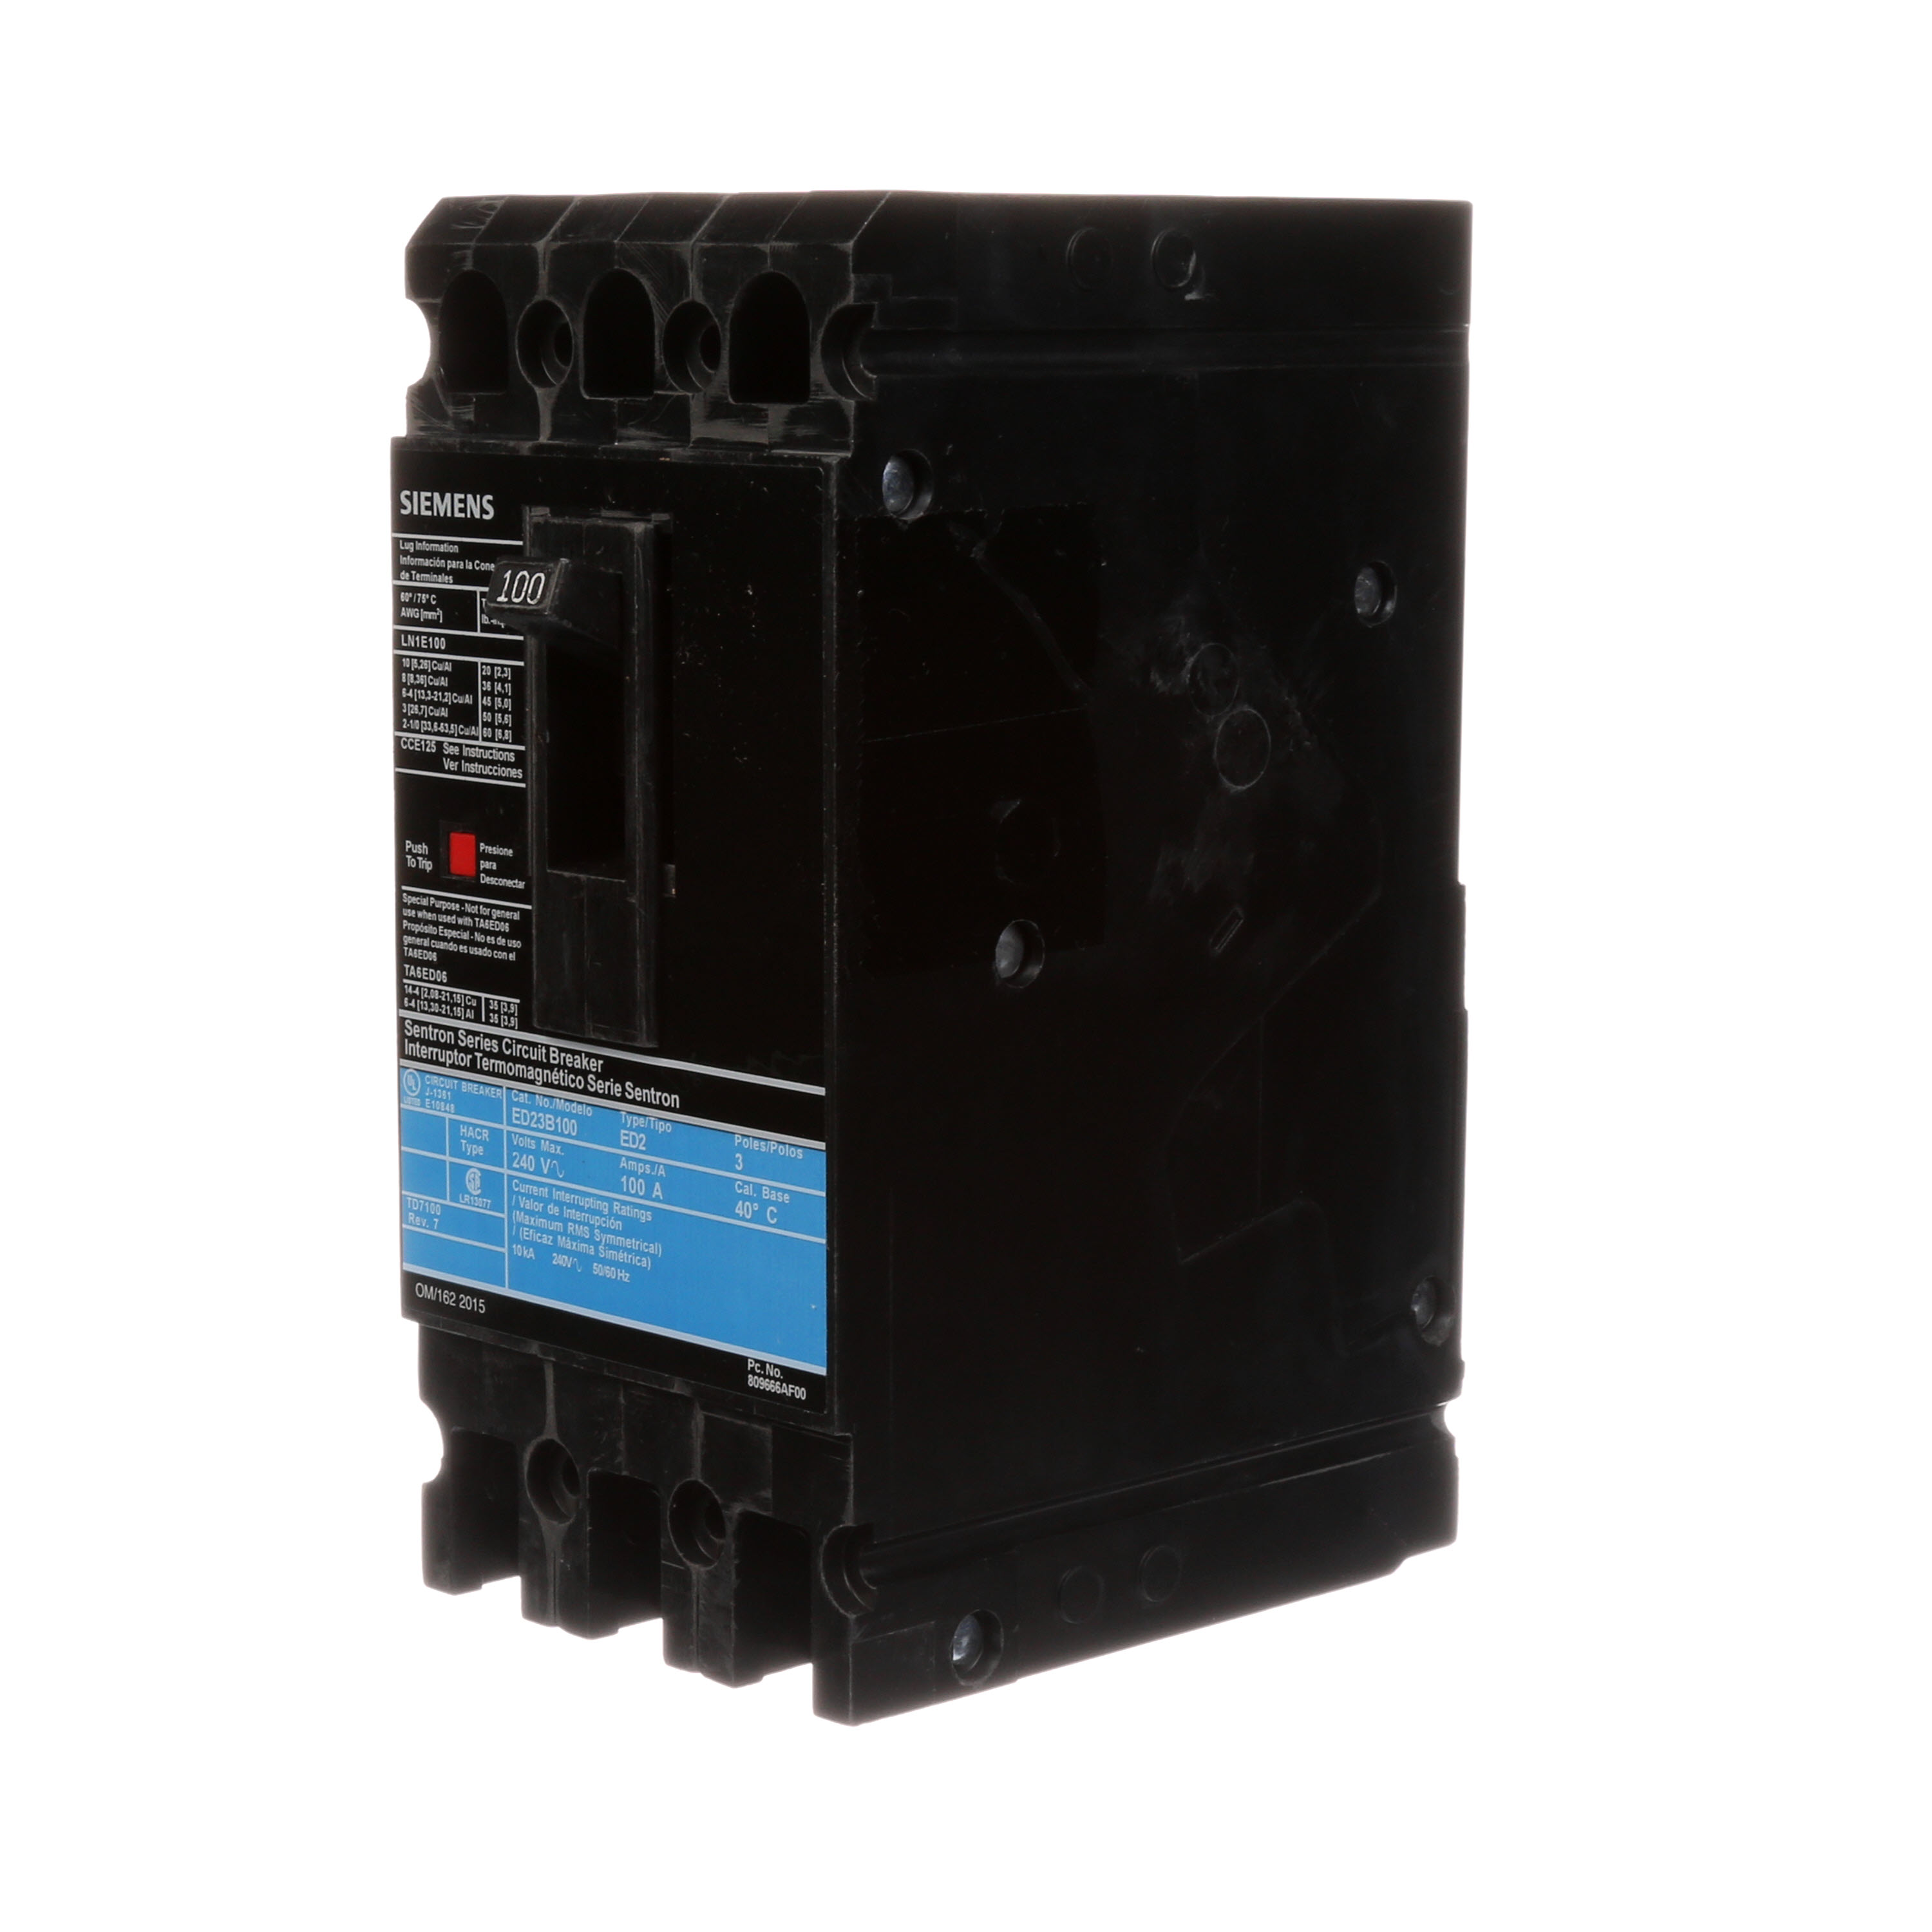 SIEMENS LOW VOLTAGE SENTRON MOLDED CASE CIRCUIT BREAKER WITH THERMAL - MAGNETICTRIP UNIT. STANDARD 40 DEG C BREAKER ED FRAME WITH STANDARD BREAKING CAPACITY. 100A 3-POLE (10KAIC AT 240V). NON-INTERCHANGEABLE TRIP UNIT. SPECIAL FEATURES LOAD LUGS ONLY (LN1E100) WIRE RANGE 10 - 1/0AWG (CU/AL). DIMENSIONS (W x H x D) IN3.00 x 6.4 x 3.92.